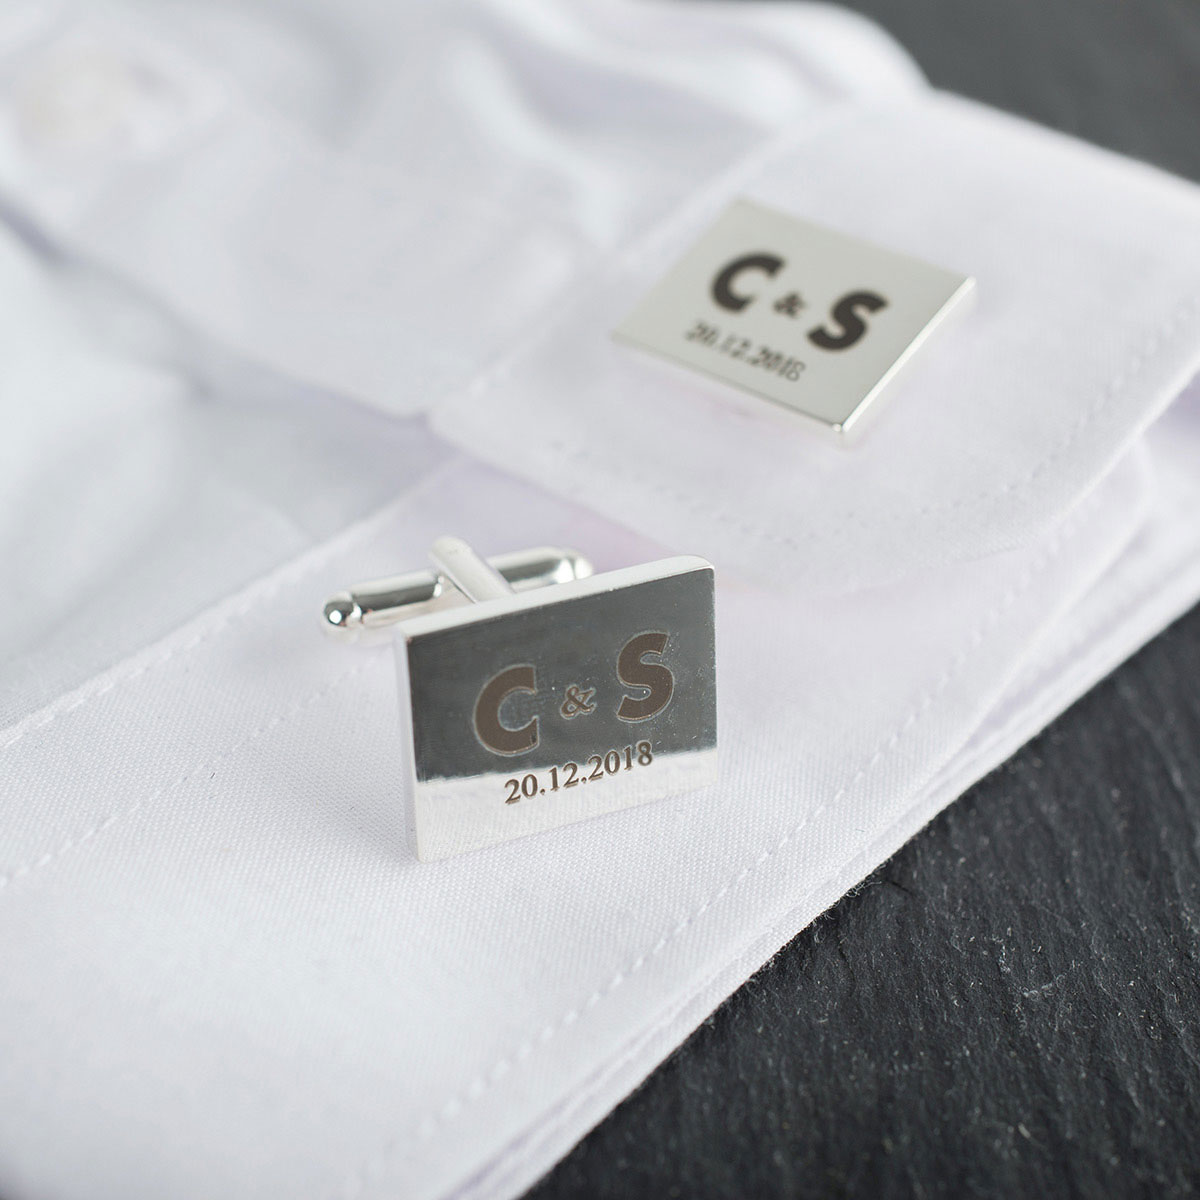 Engraved Rectangle Cufflinks - Couple's Initials